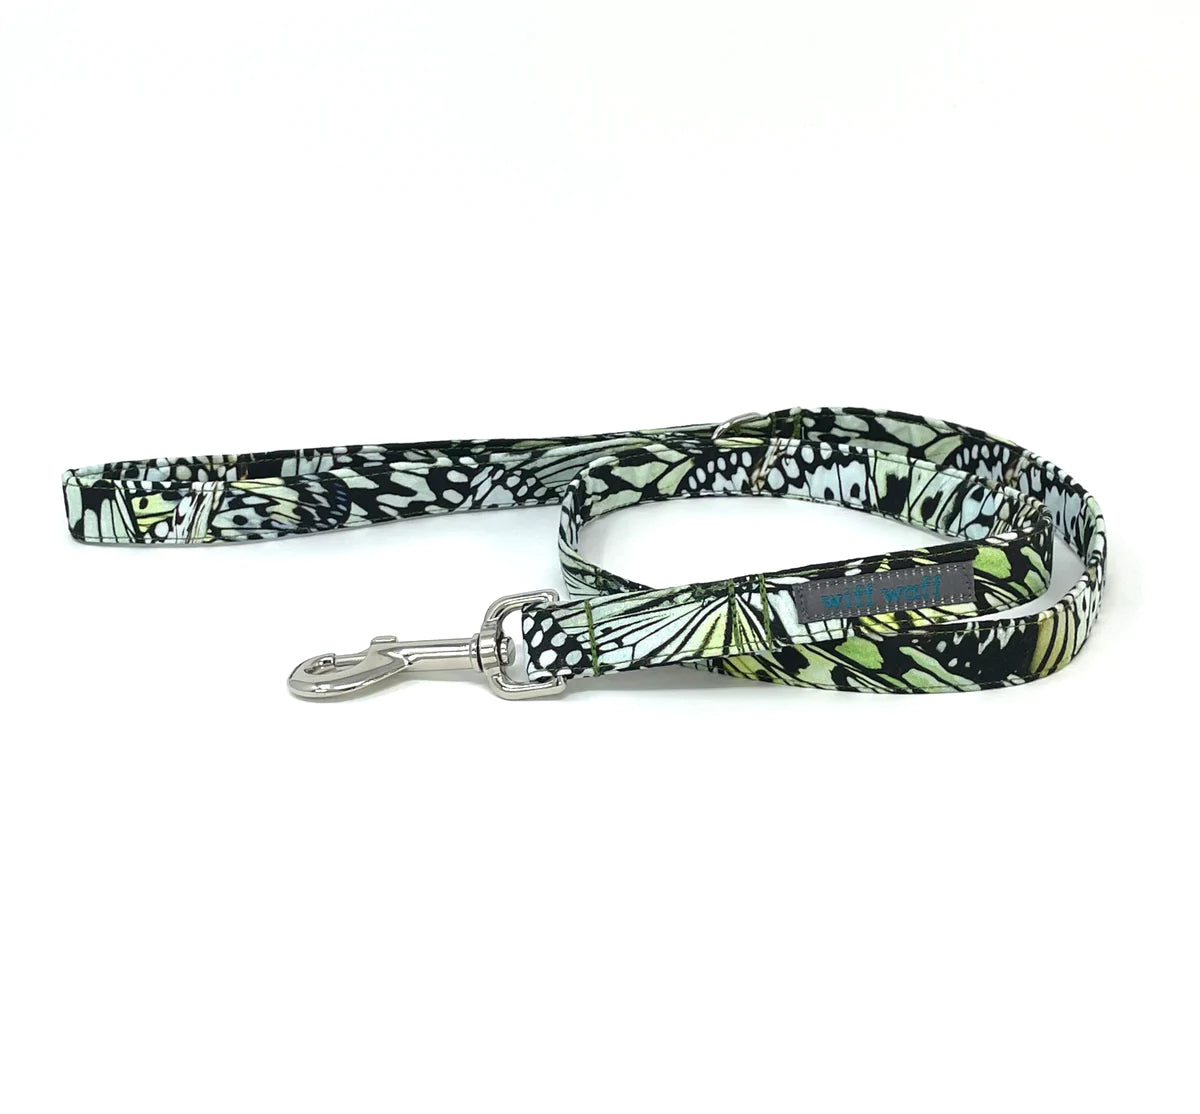 Green butterfly print fabric dog lead handcrafted by wiff waff designs